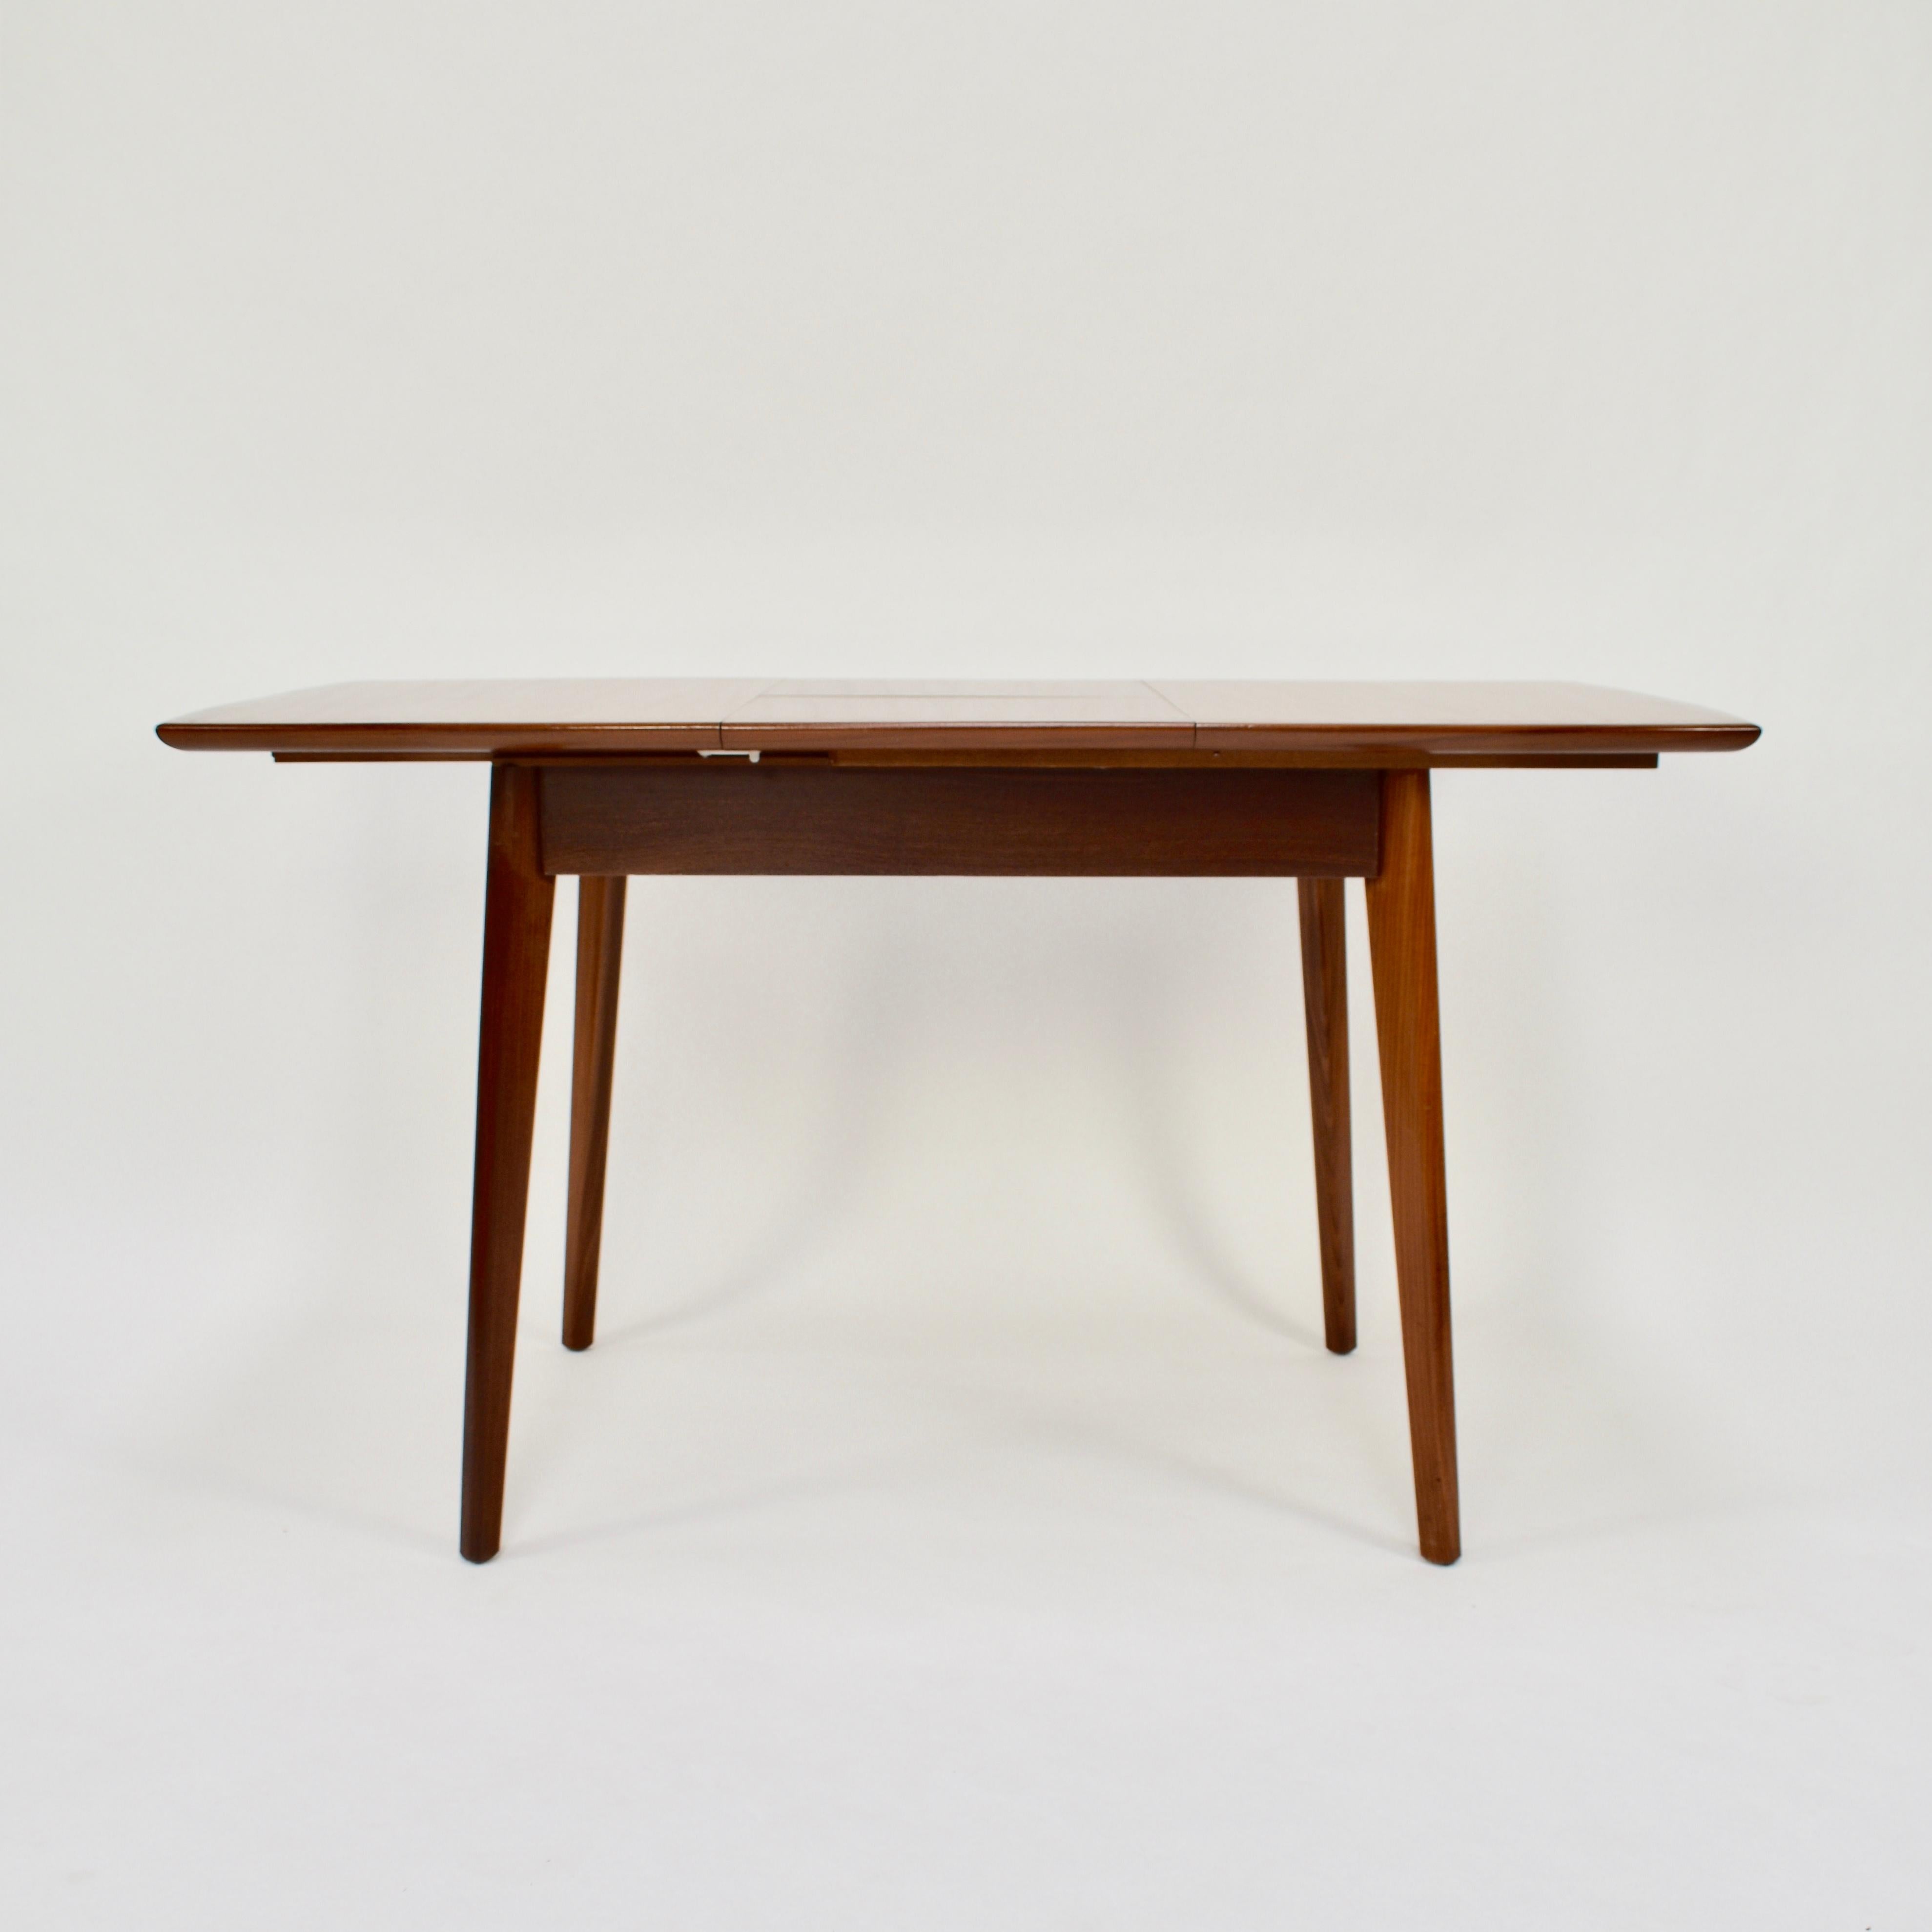 Dutch Small Extractable Dining Table by Louis van Teeffelen, Netherlands, 1960